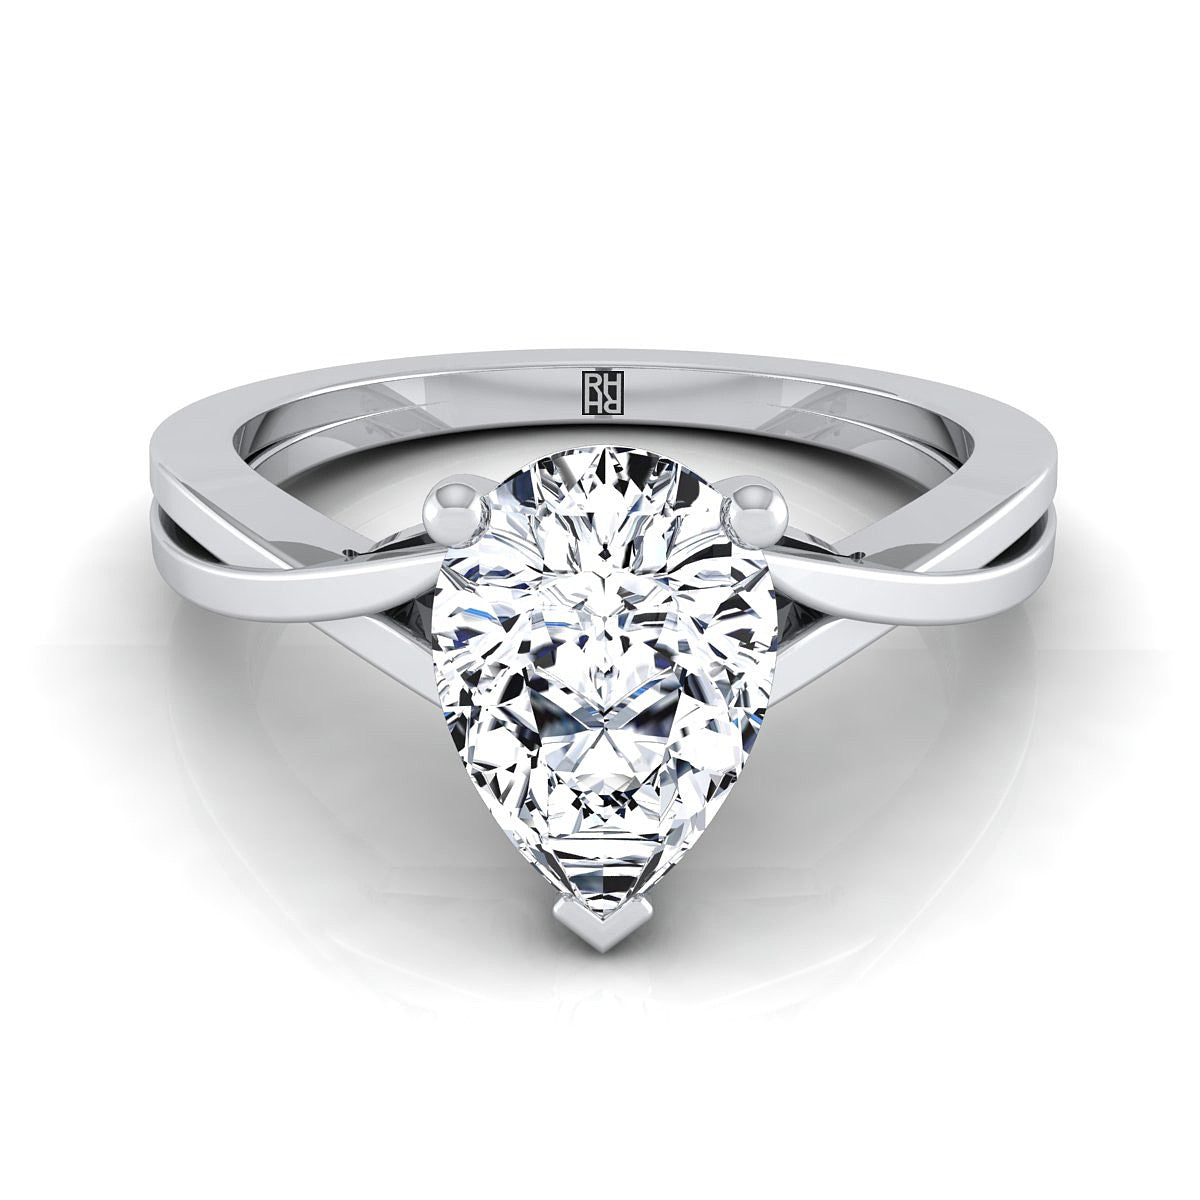 Shop All Engagement Rings Styles and Settings